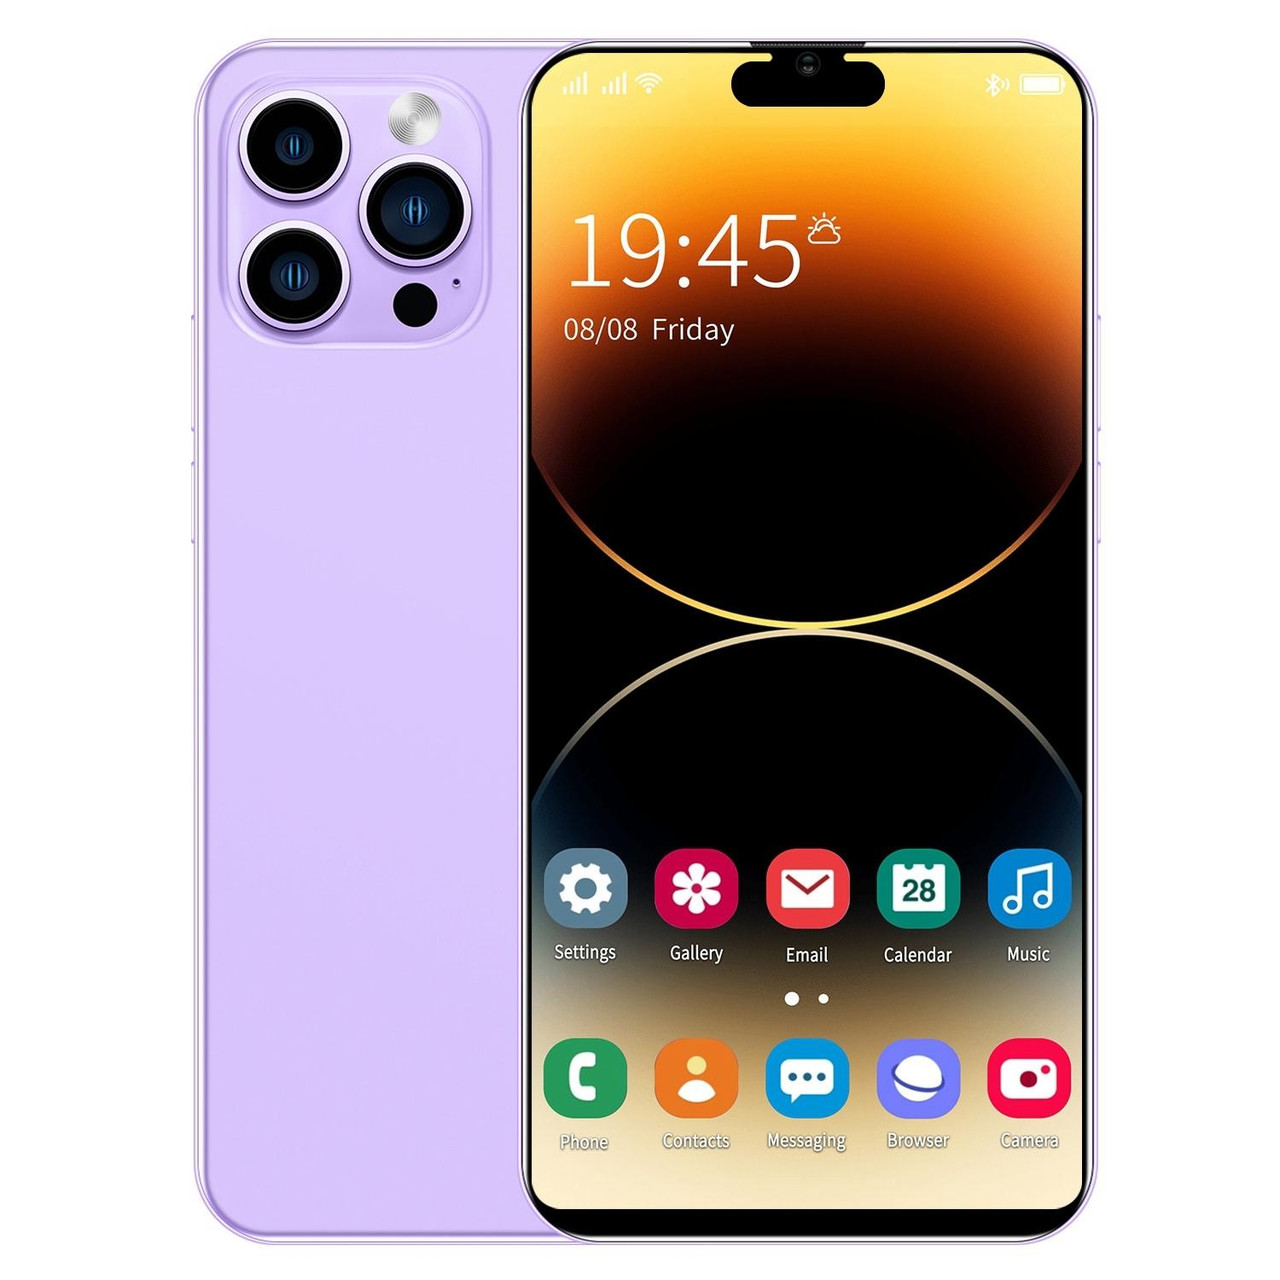 i14 Pro Max / H208, 2GB+16GB, 6.5 inch, Face Identification, Android 8.1  MTK6580P Quad Core, Network: 3G (Purple), snatcher